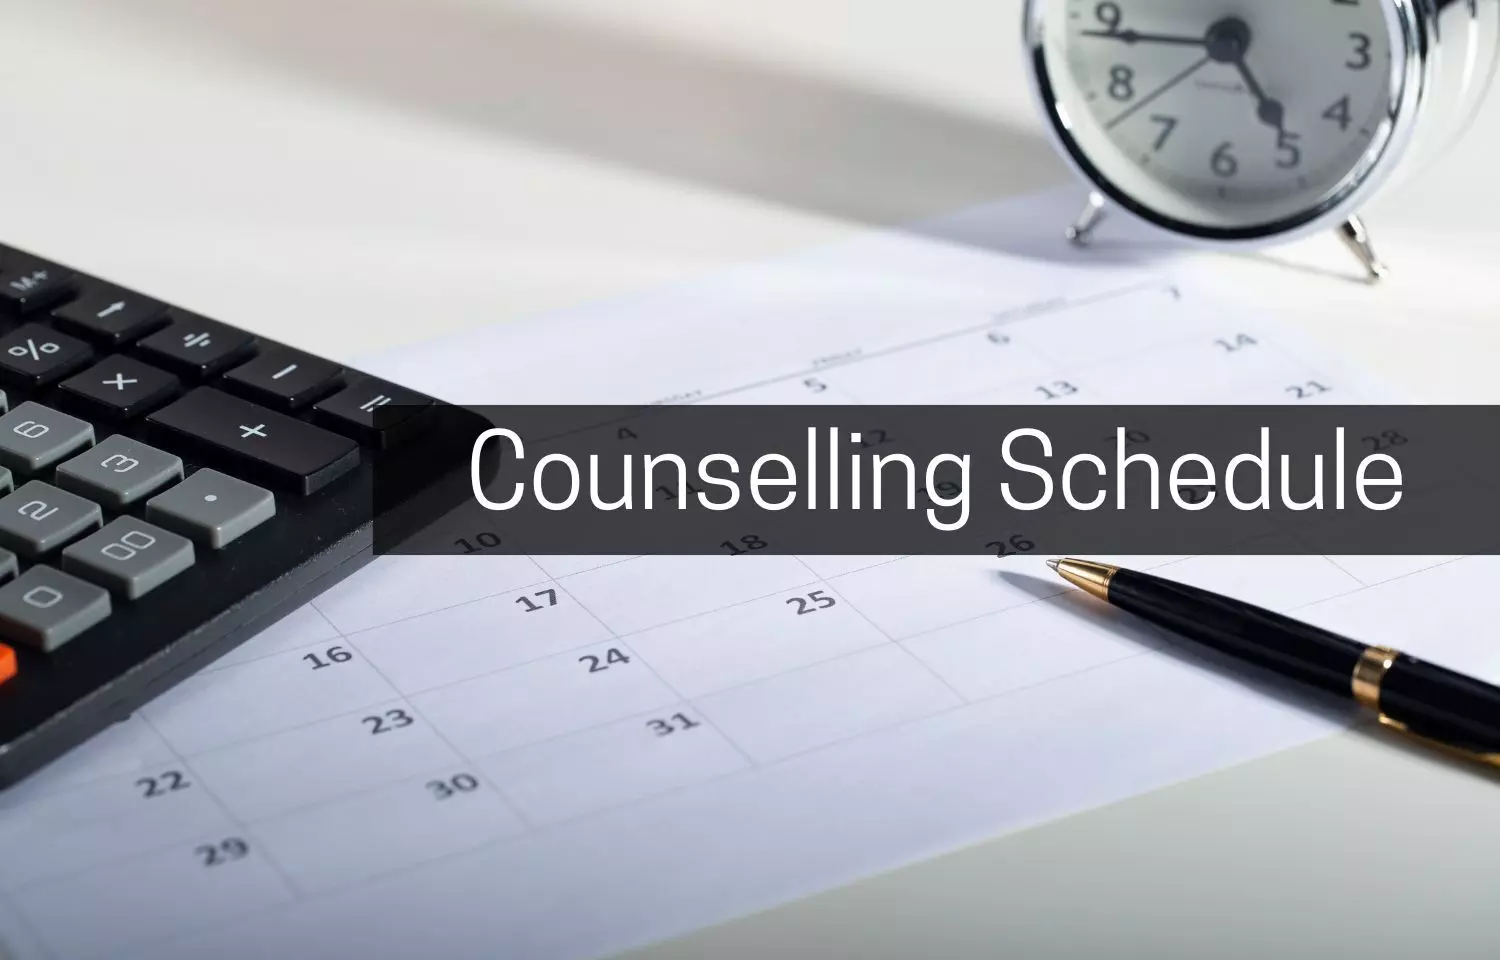 WBMCC Releases Tentative Schedule for NEET PG, MDS counselling 2022, check out Details